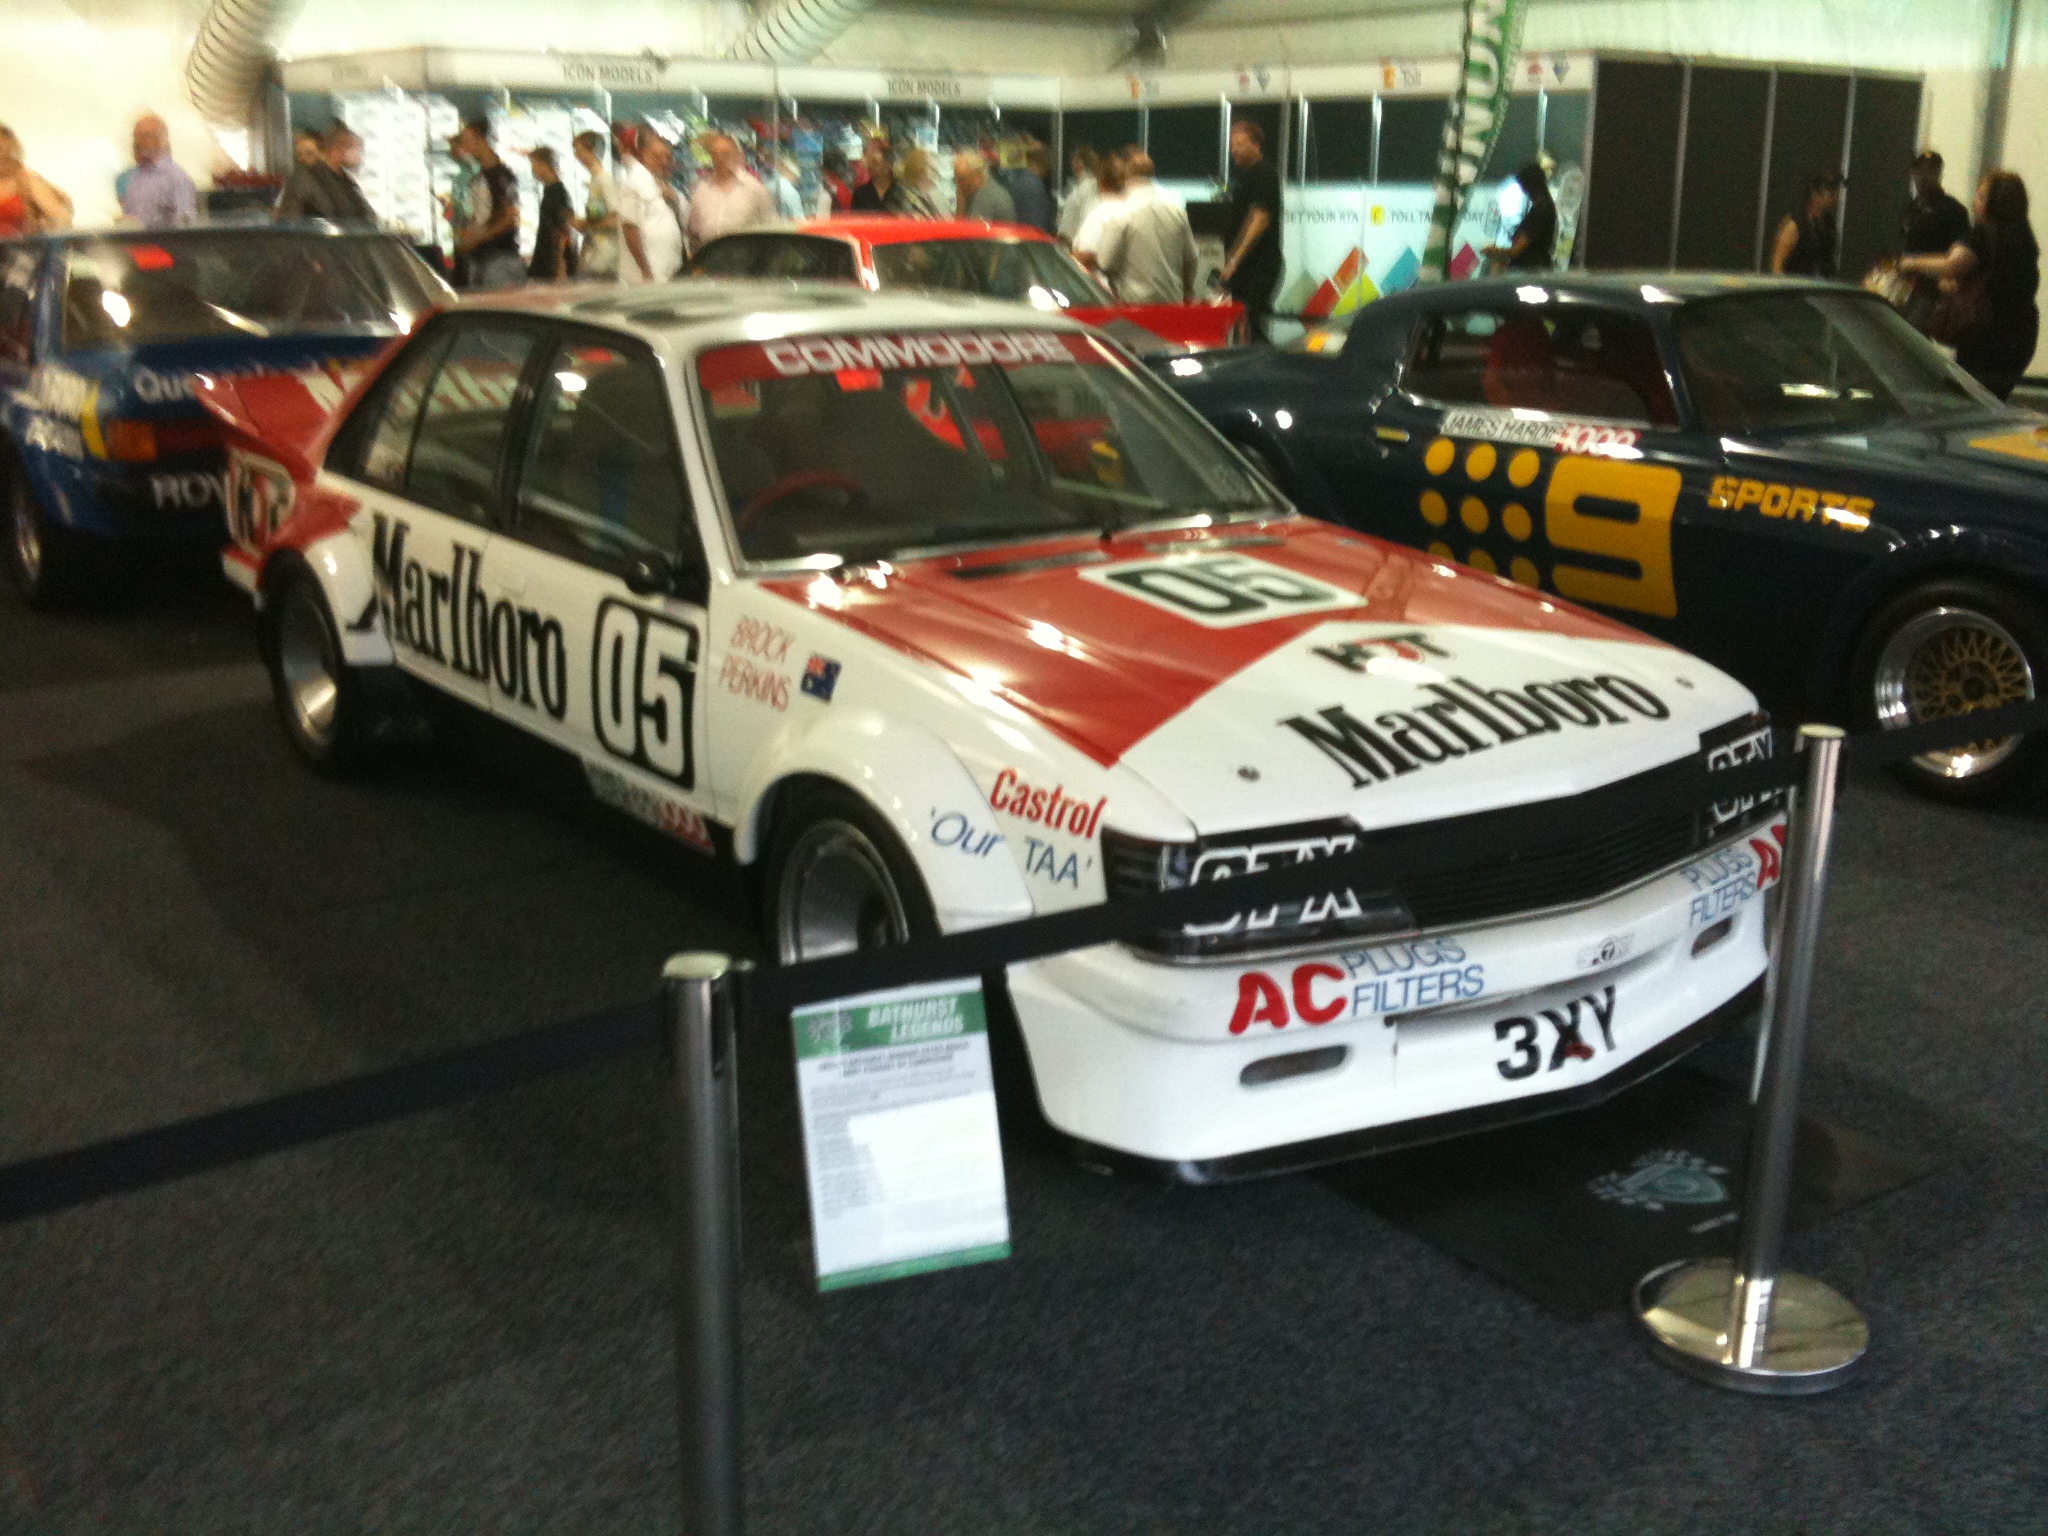 a car is parked at the exhibition booth